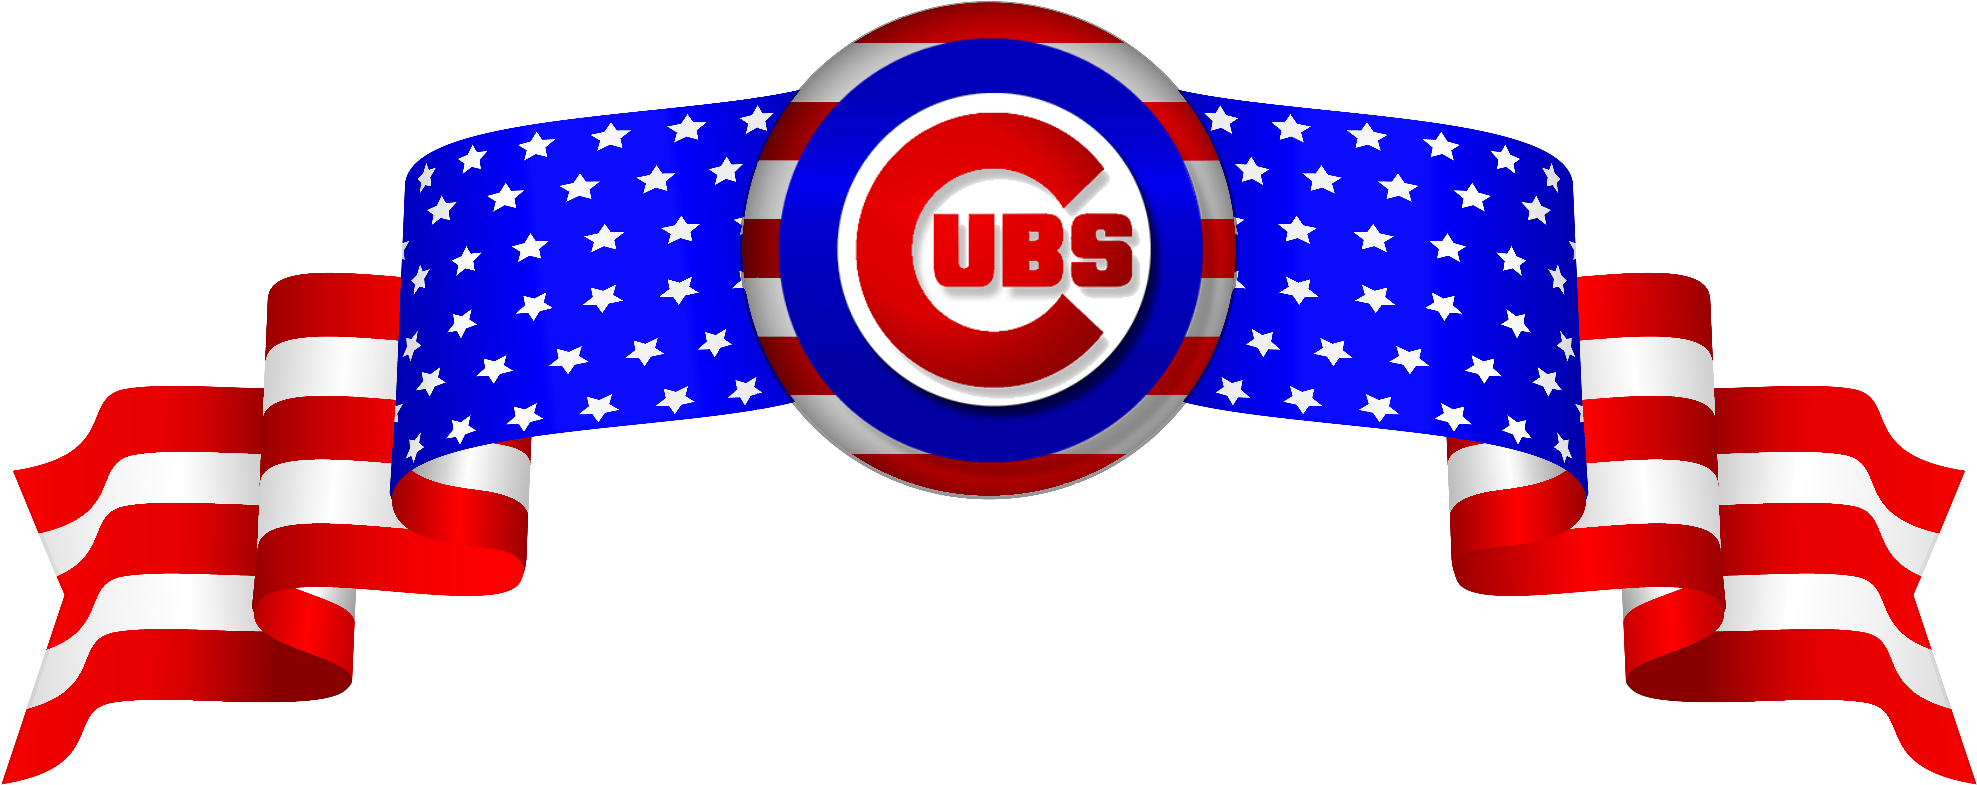 Chicago Cubs Logo, Chicago Cubs Baseball, Mlb Players, - Chicago Cubs (2000x1500)